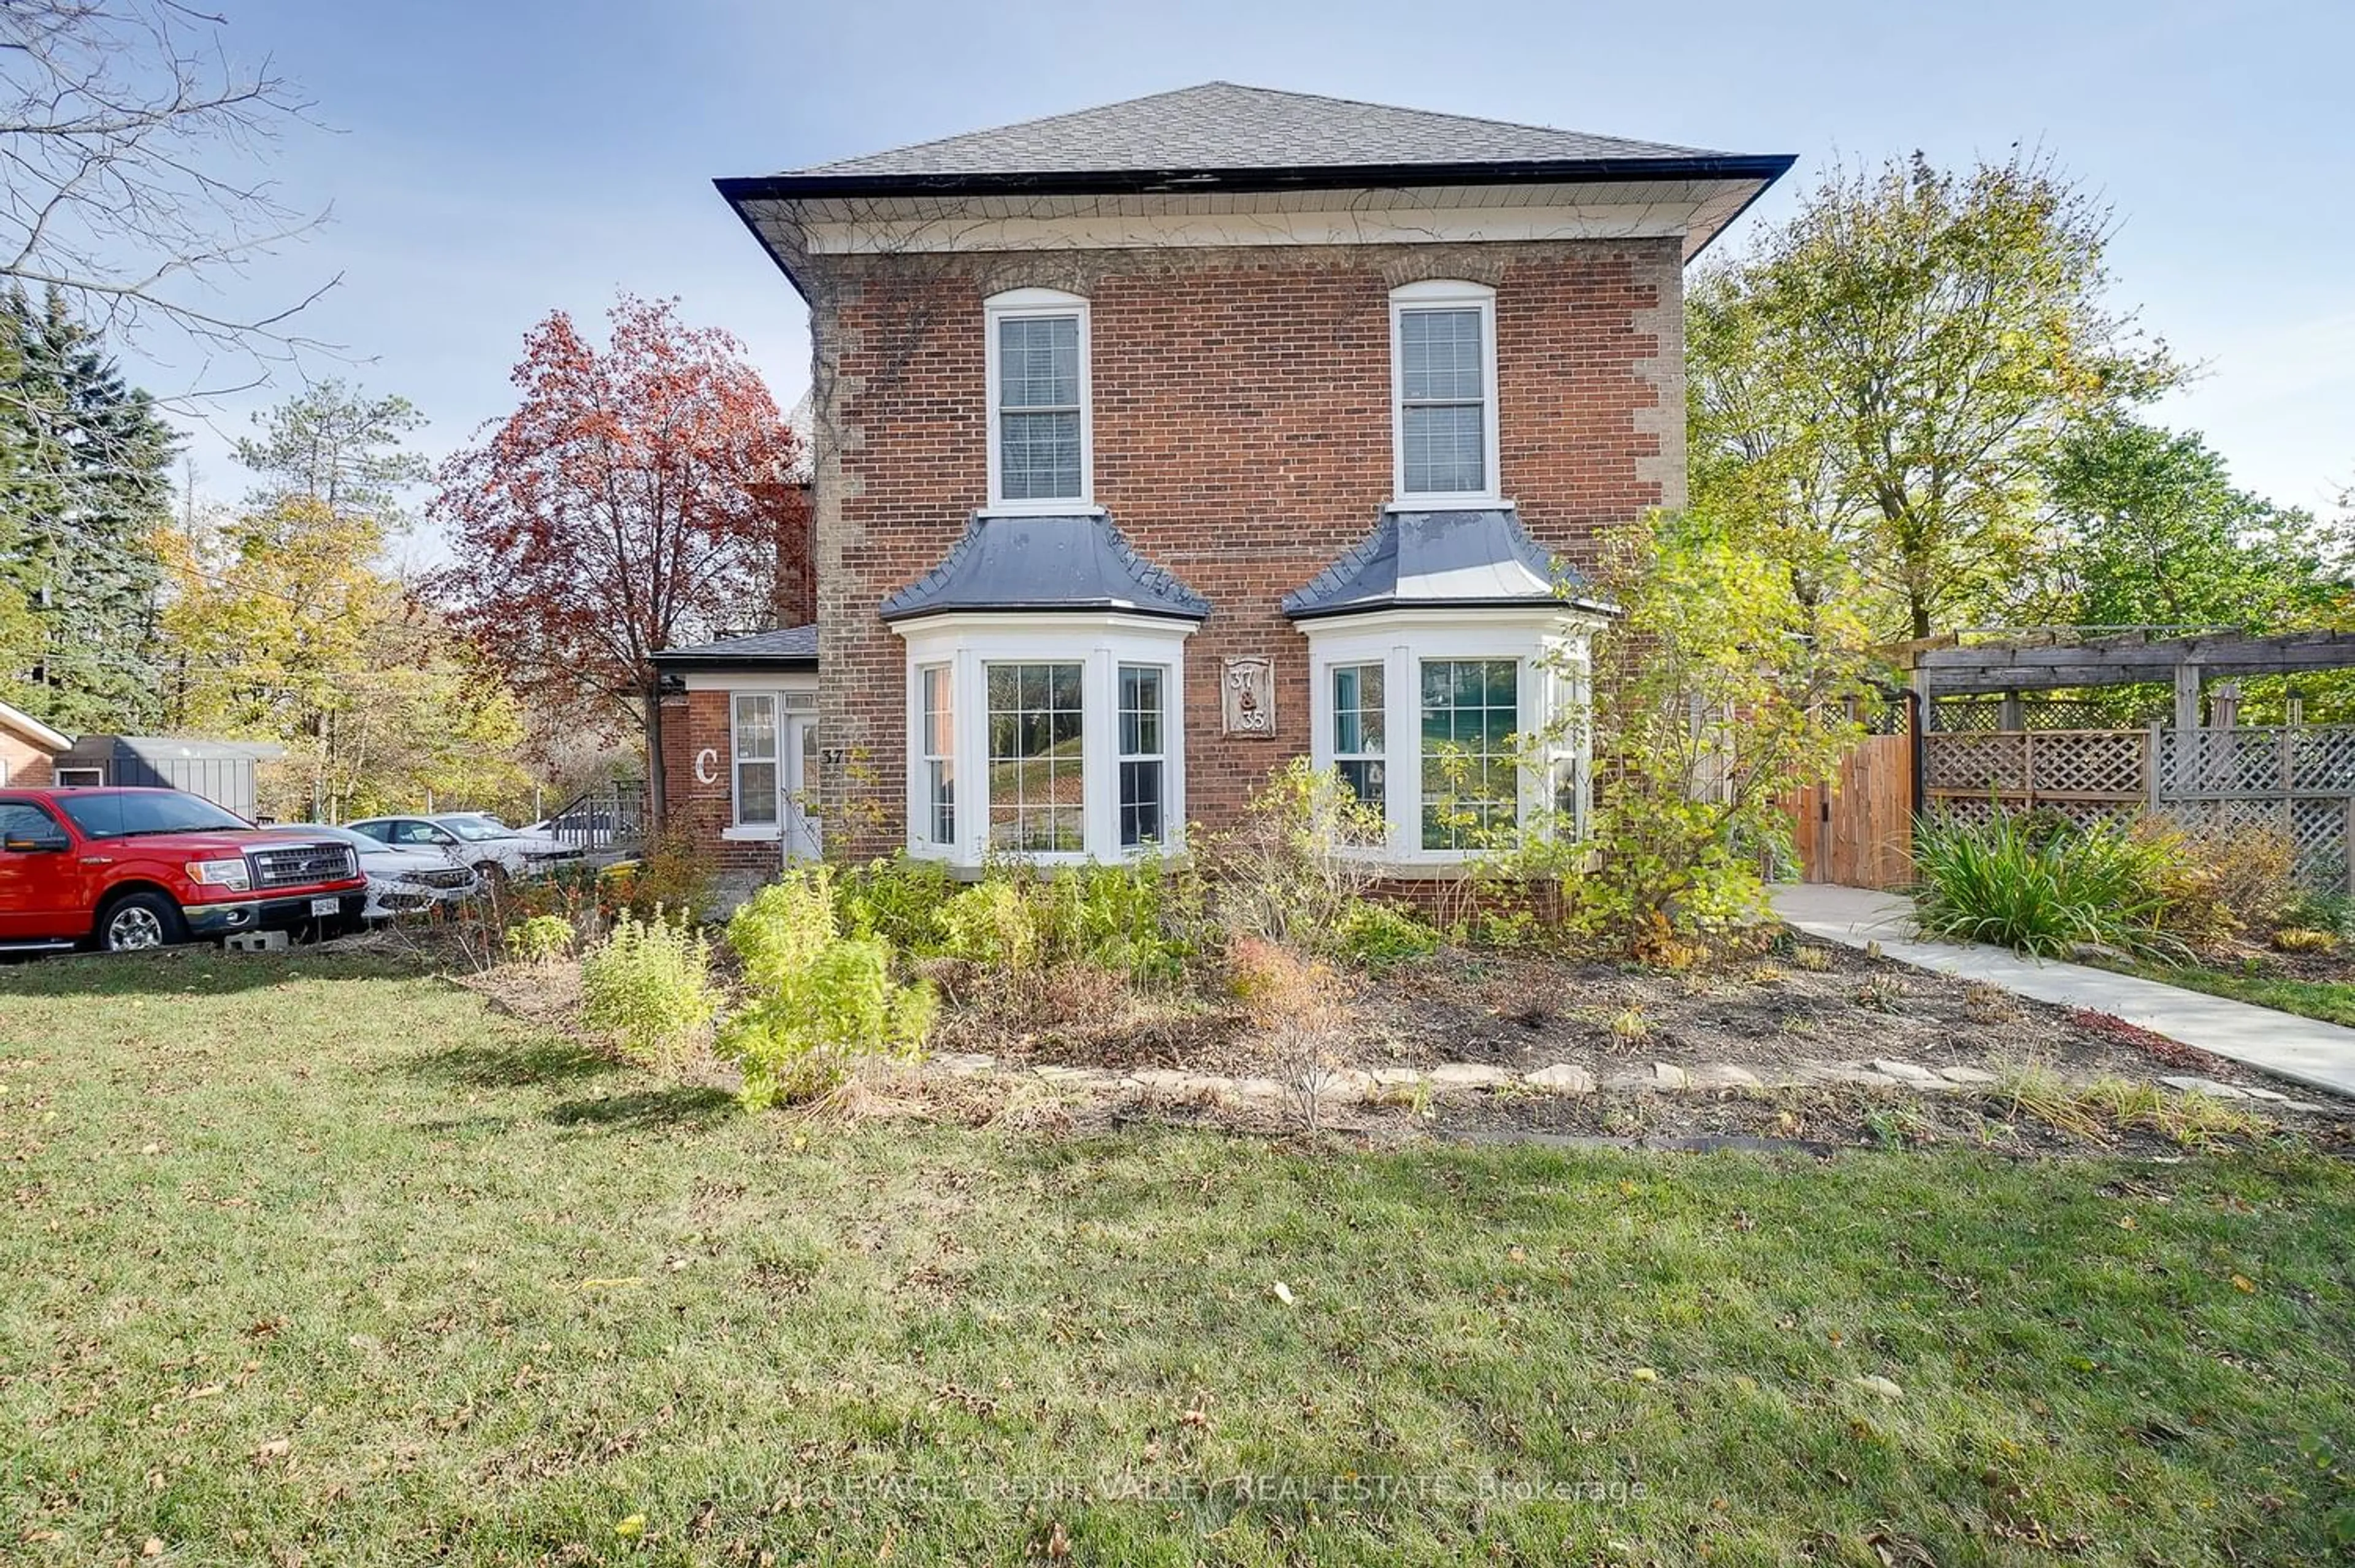 Home with brick exterior material for 35 & 37 First St, Orangeville Ontario L9W 2E3